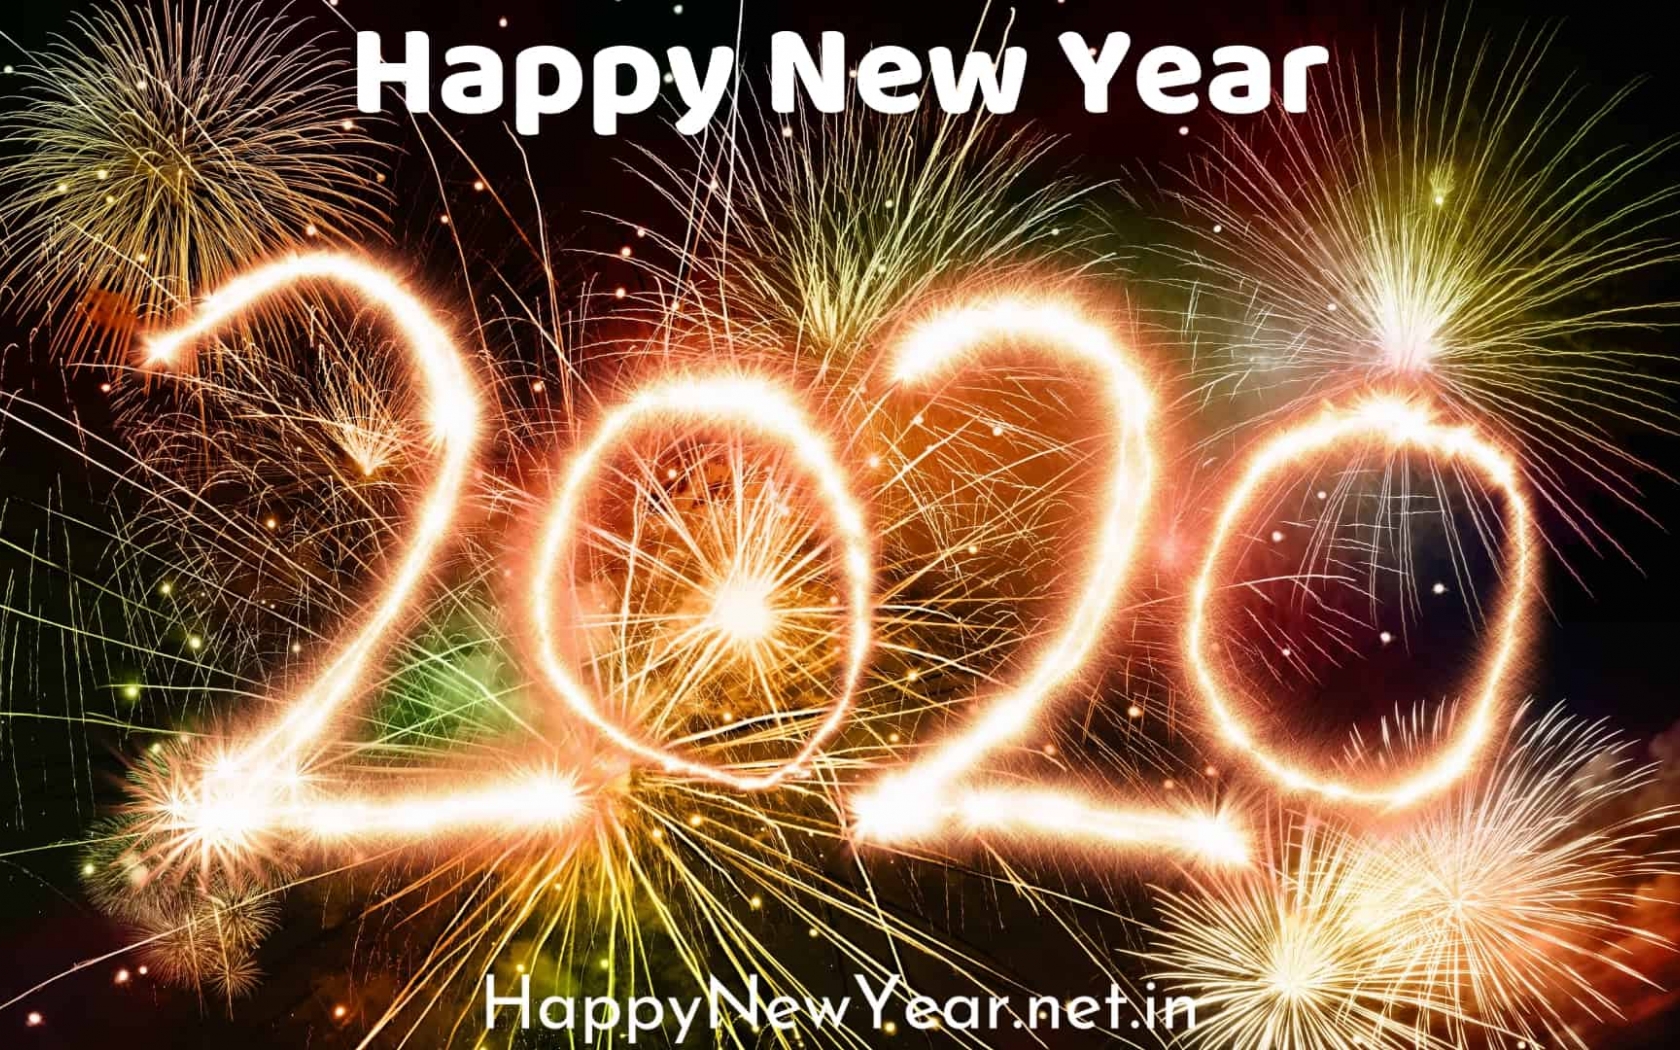 Free download Free download Happy new year wishes for friends 2020 ...